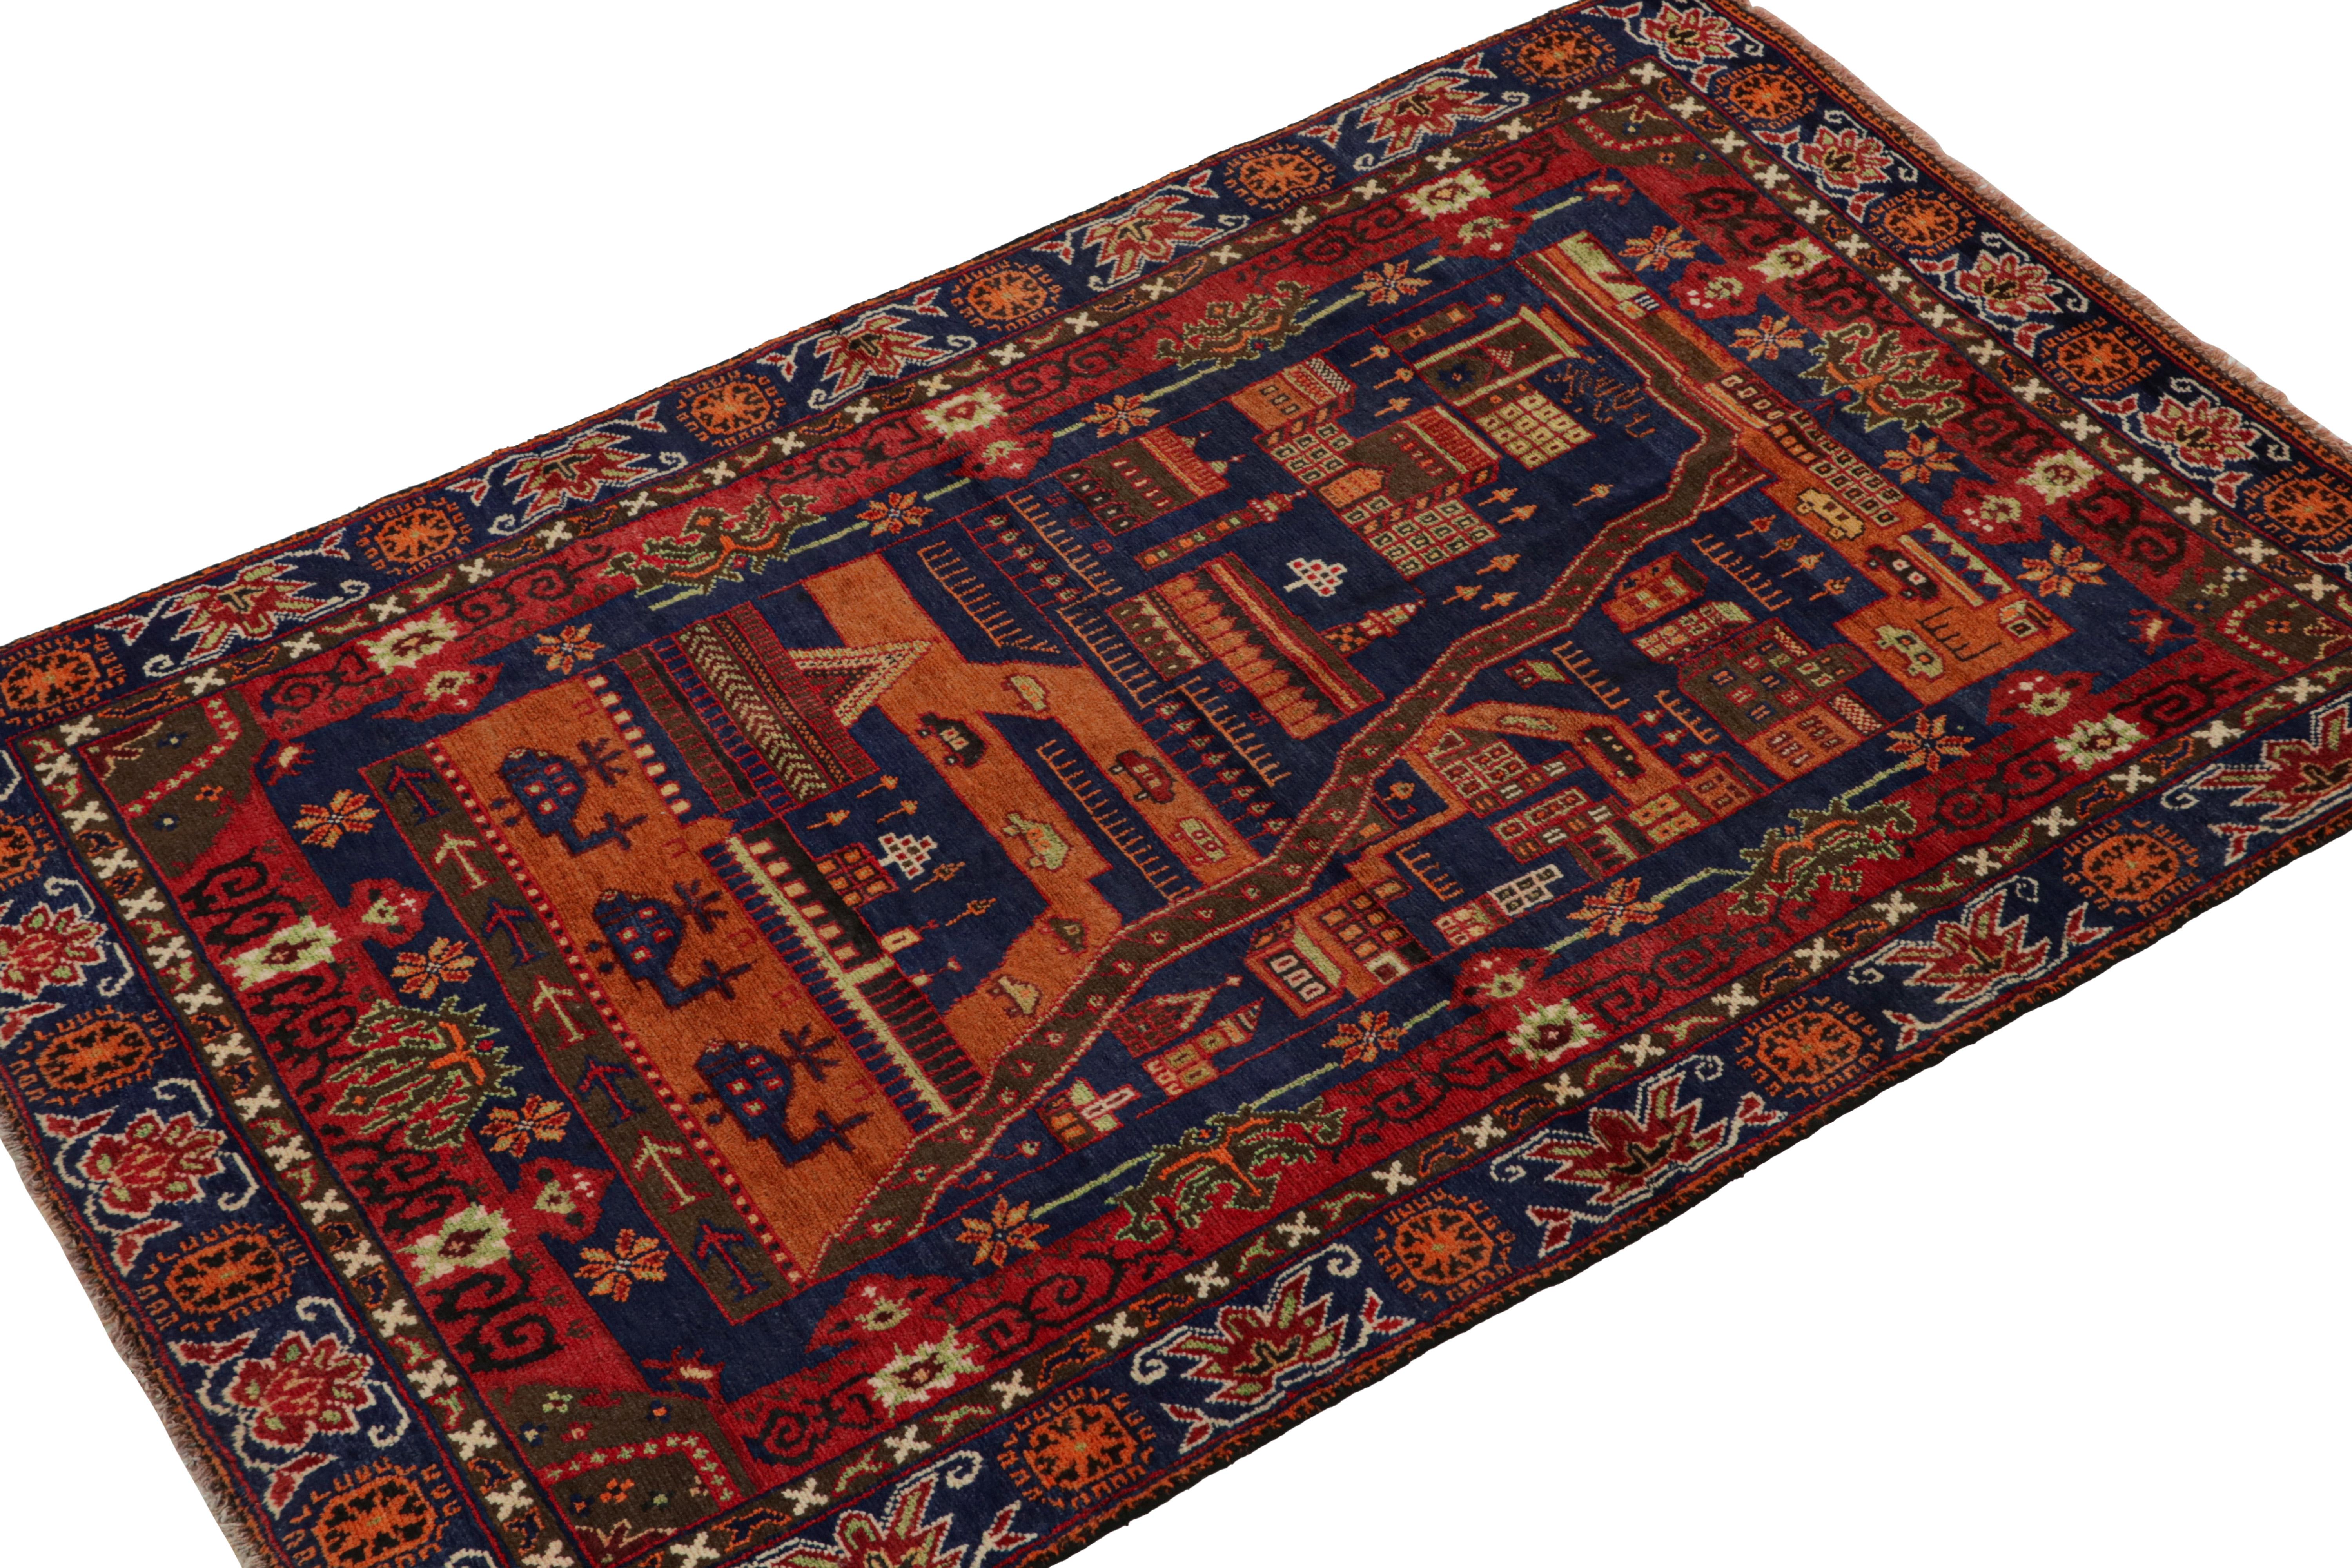 Hand-knotted in wool and goat hair, this 4x6 vintage Baluch rug is an extremely rare and collectible pictorial design from the Rug & Kilim collection. 

On the Design:

Connoisseurs will note few works found of this nomadic provenance enjoy